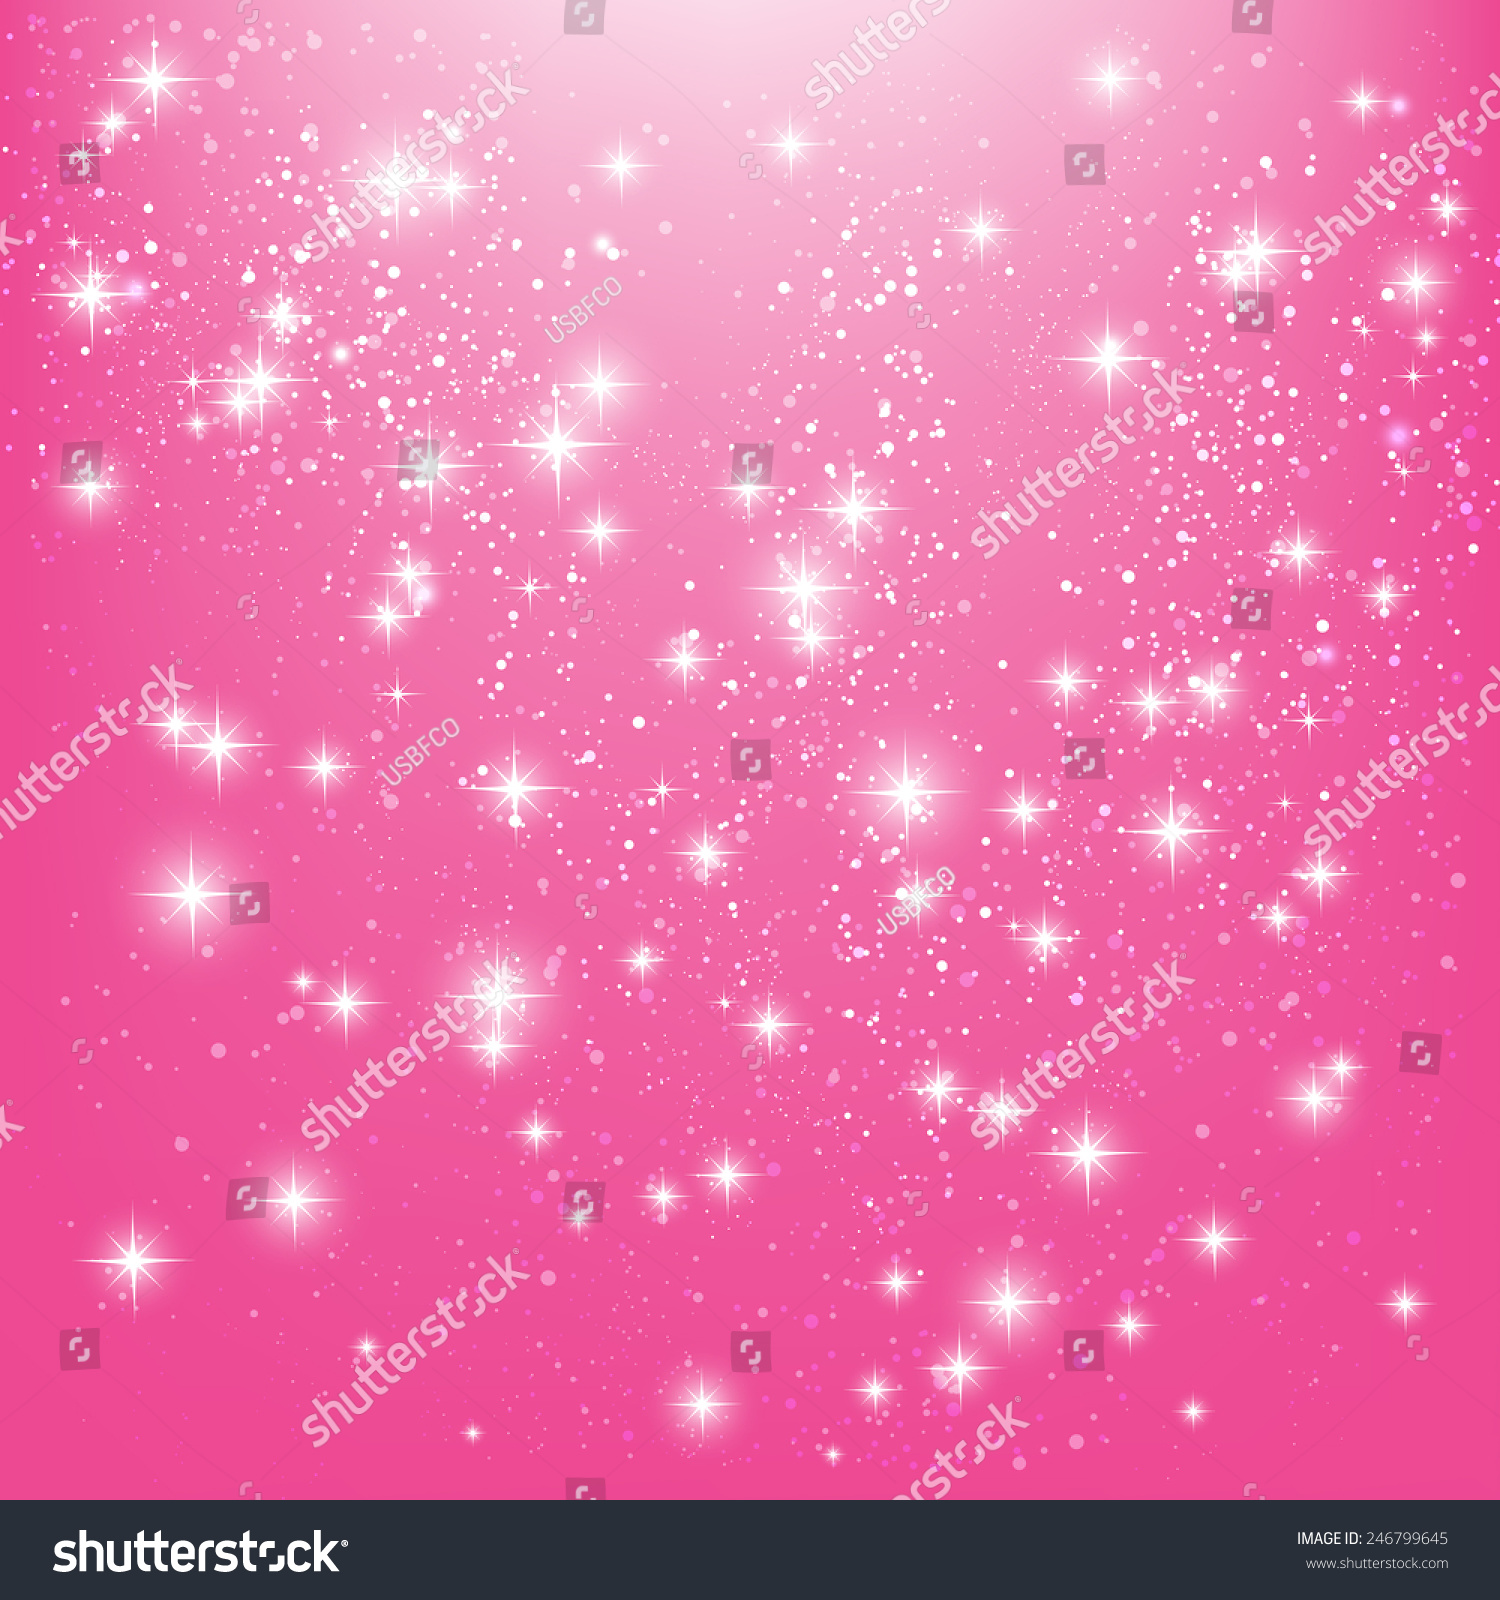 Shiny Stars On Pink Background Stock Vector Royalty Free 246799645